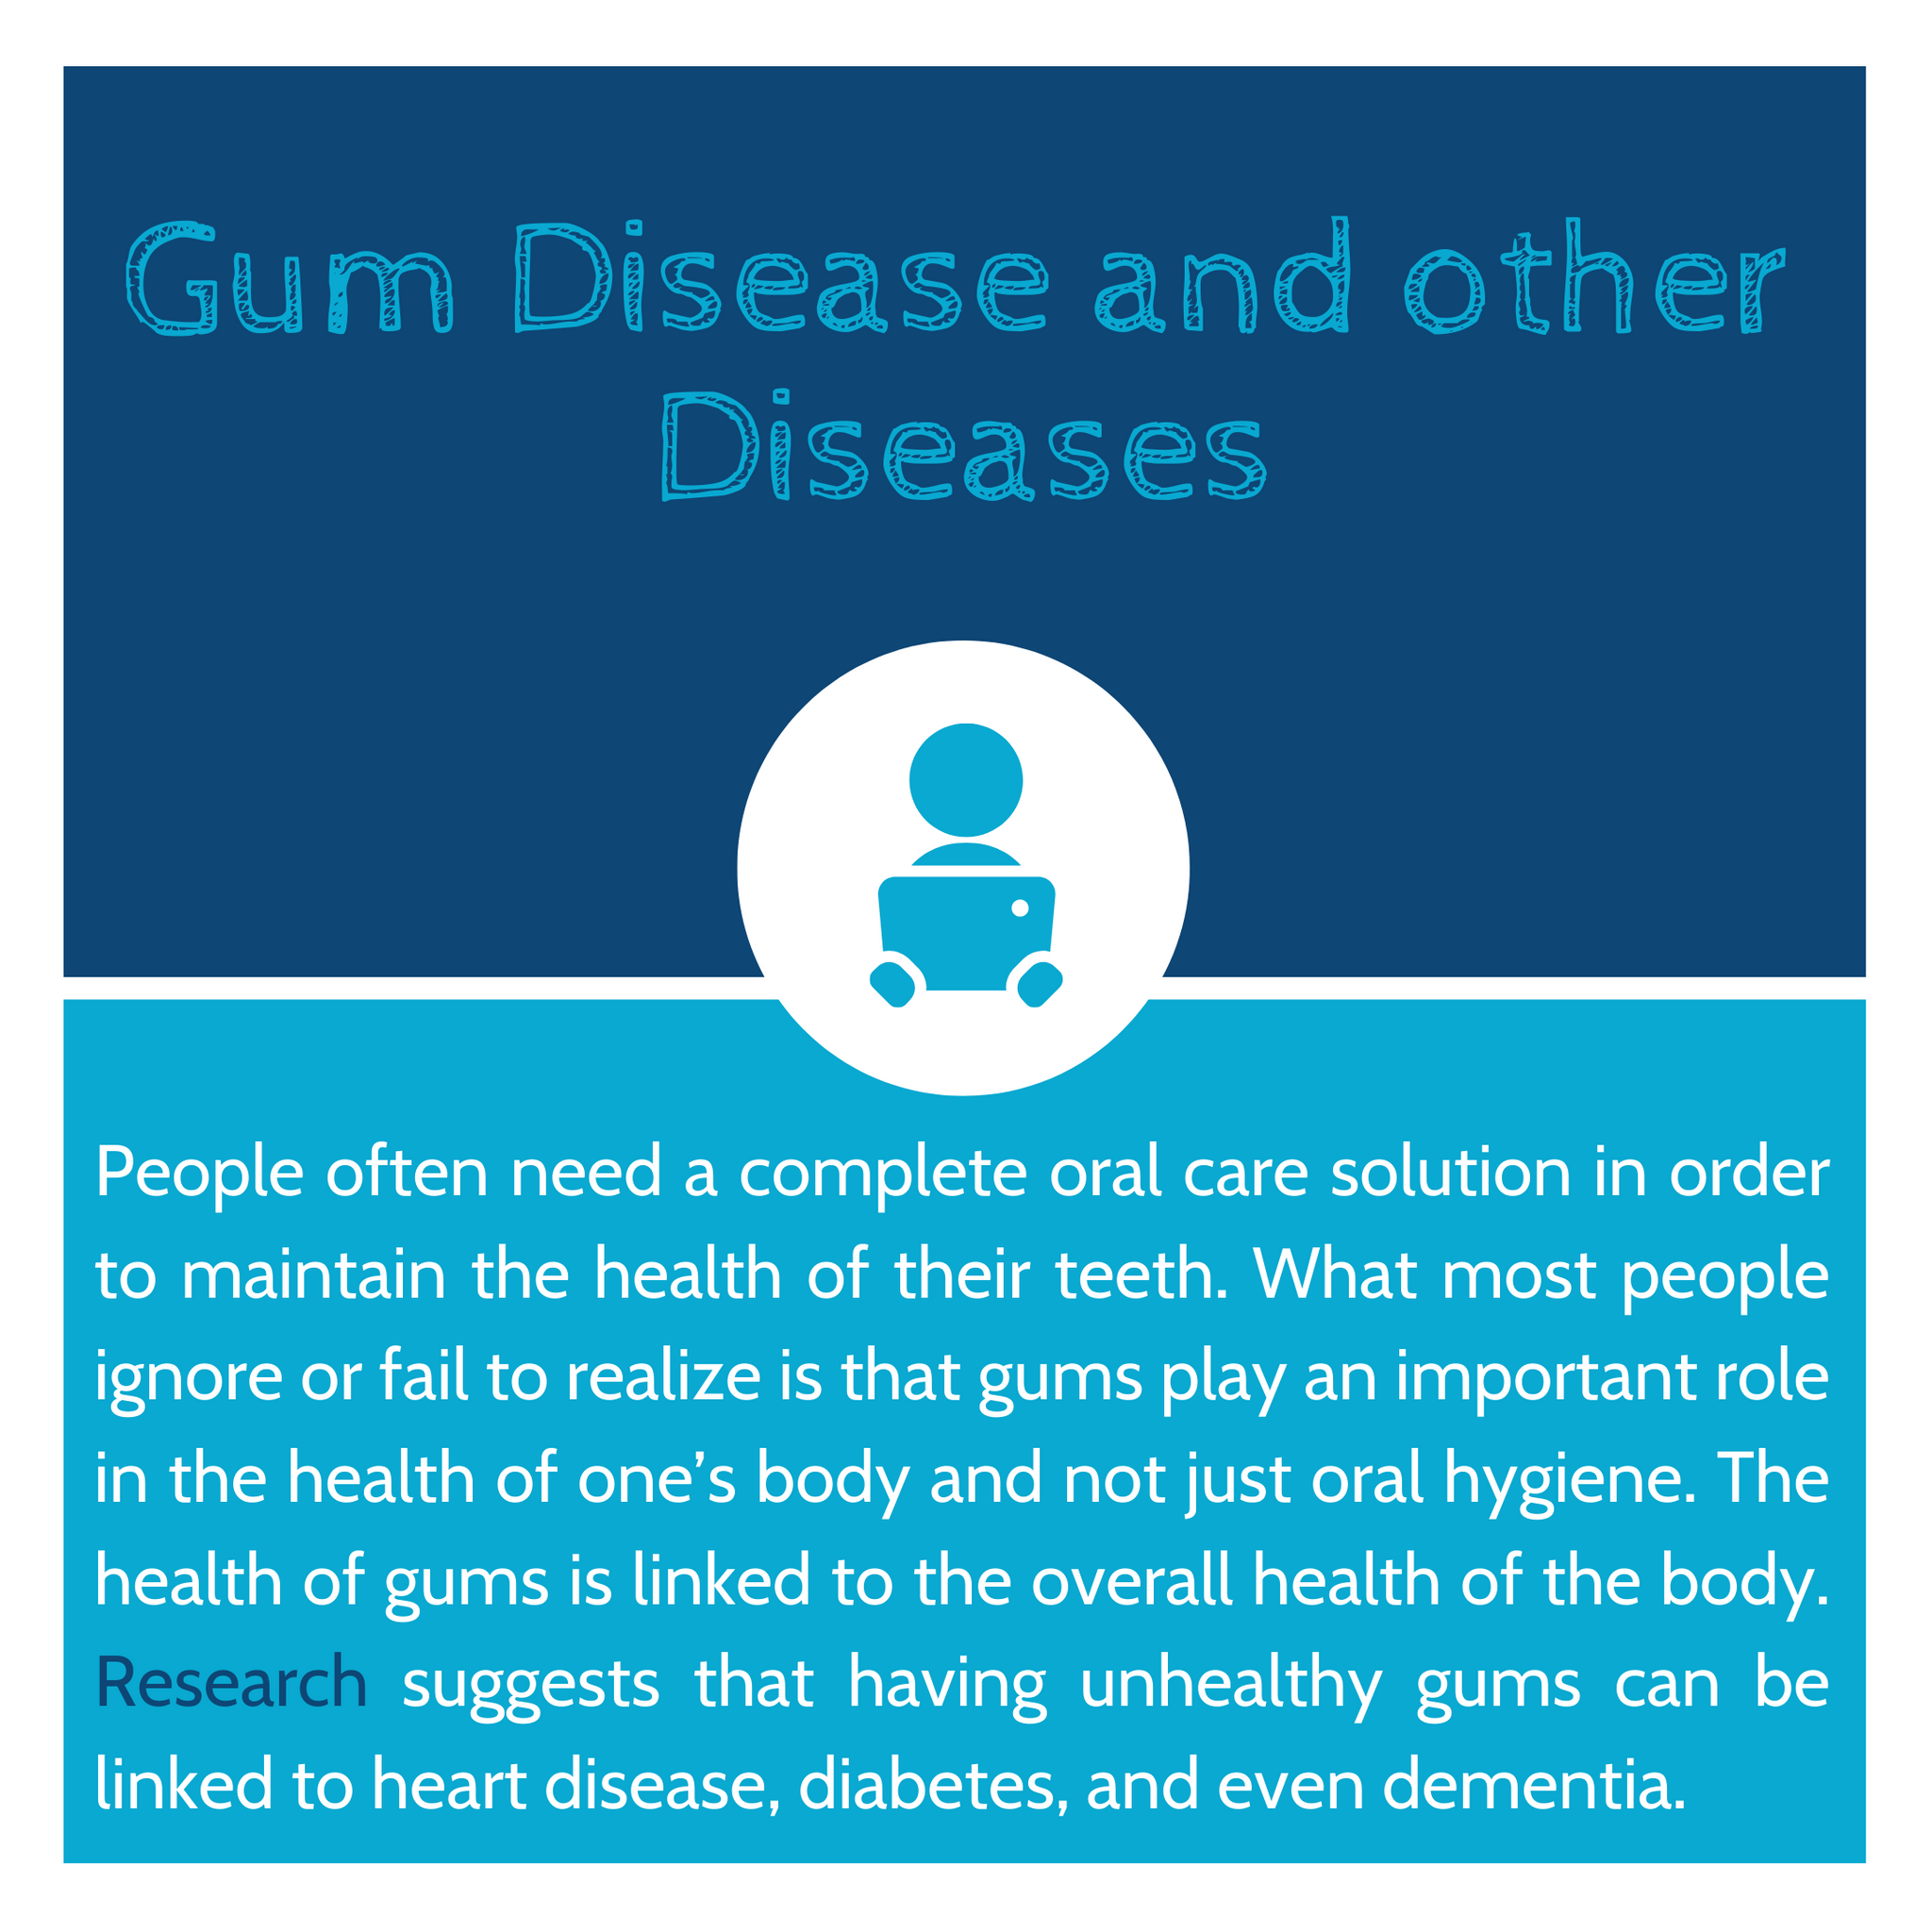 People often need a complete oral care solution in order to maintain the health of their teeth. What most people ignore or fail to realize is that gums play an important role in the health of one’s body and not just oral hygiene. The health of gums is linked to the overall health of the body. Research suggests that having unhealthy gums can be linked to heart disease, diabetes, and even dementia.